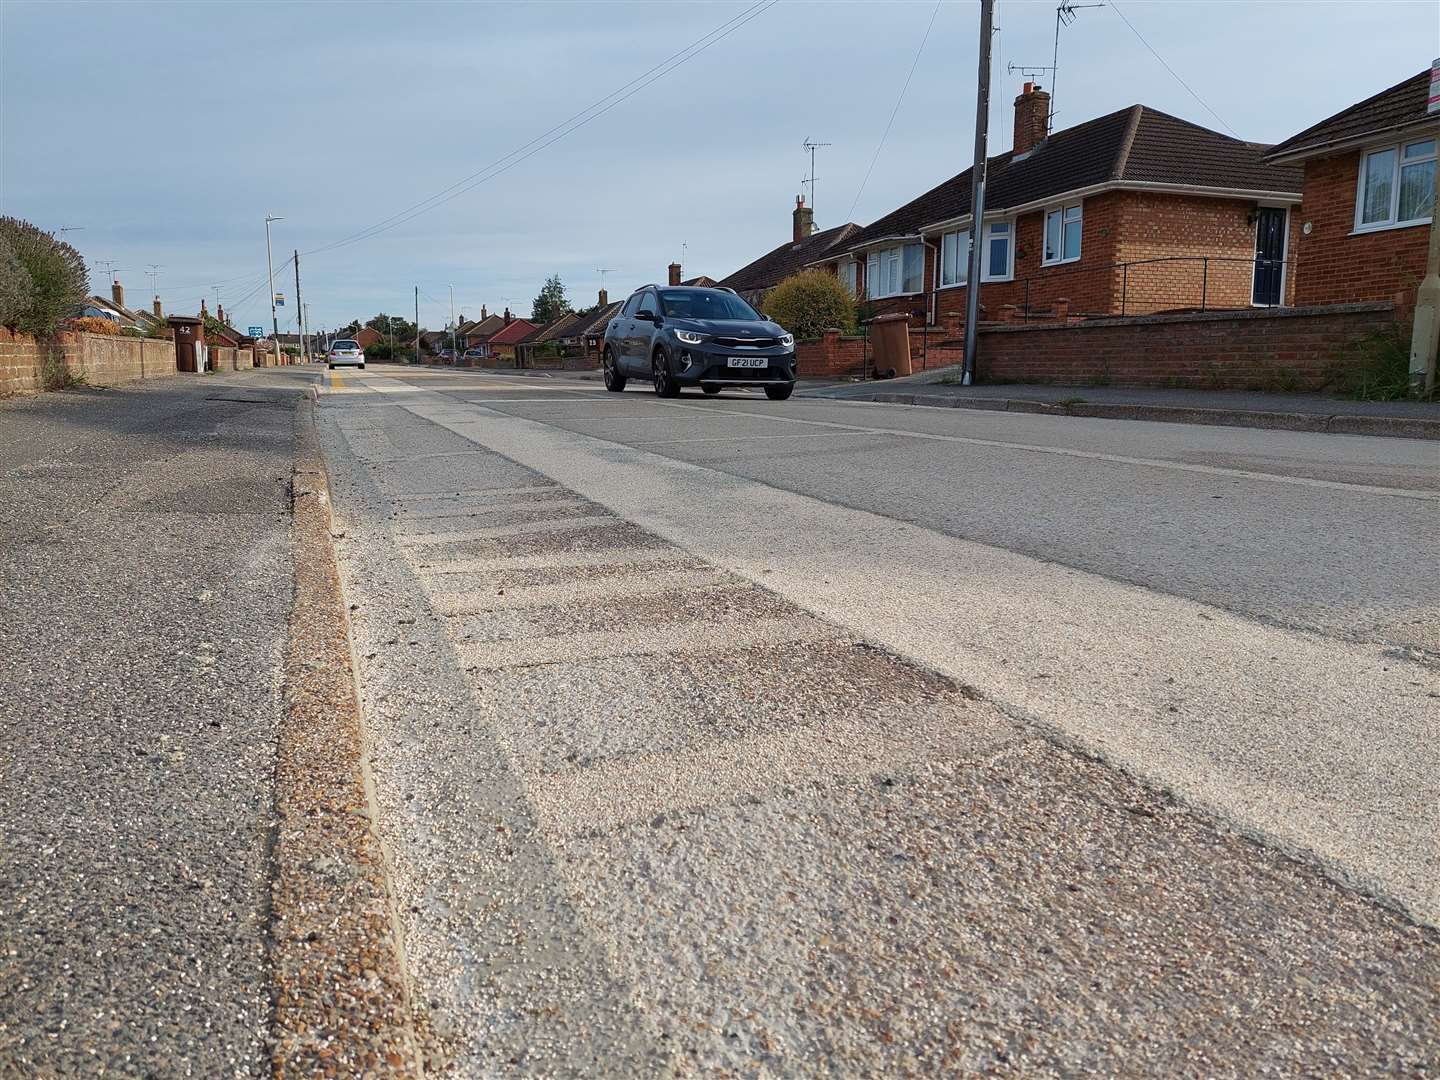 Resurfacing work was carried out using a new method council bosses are trialling called ‘concrete rehabilitation’